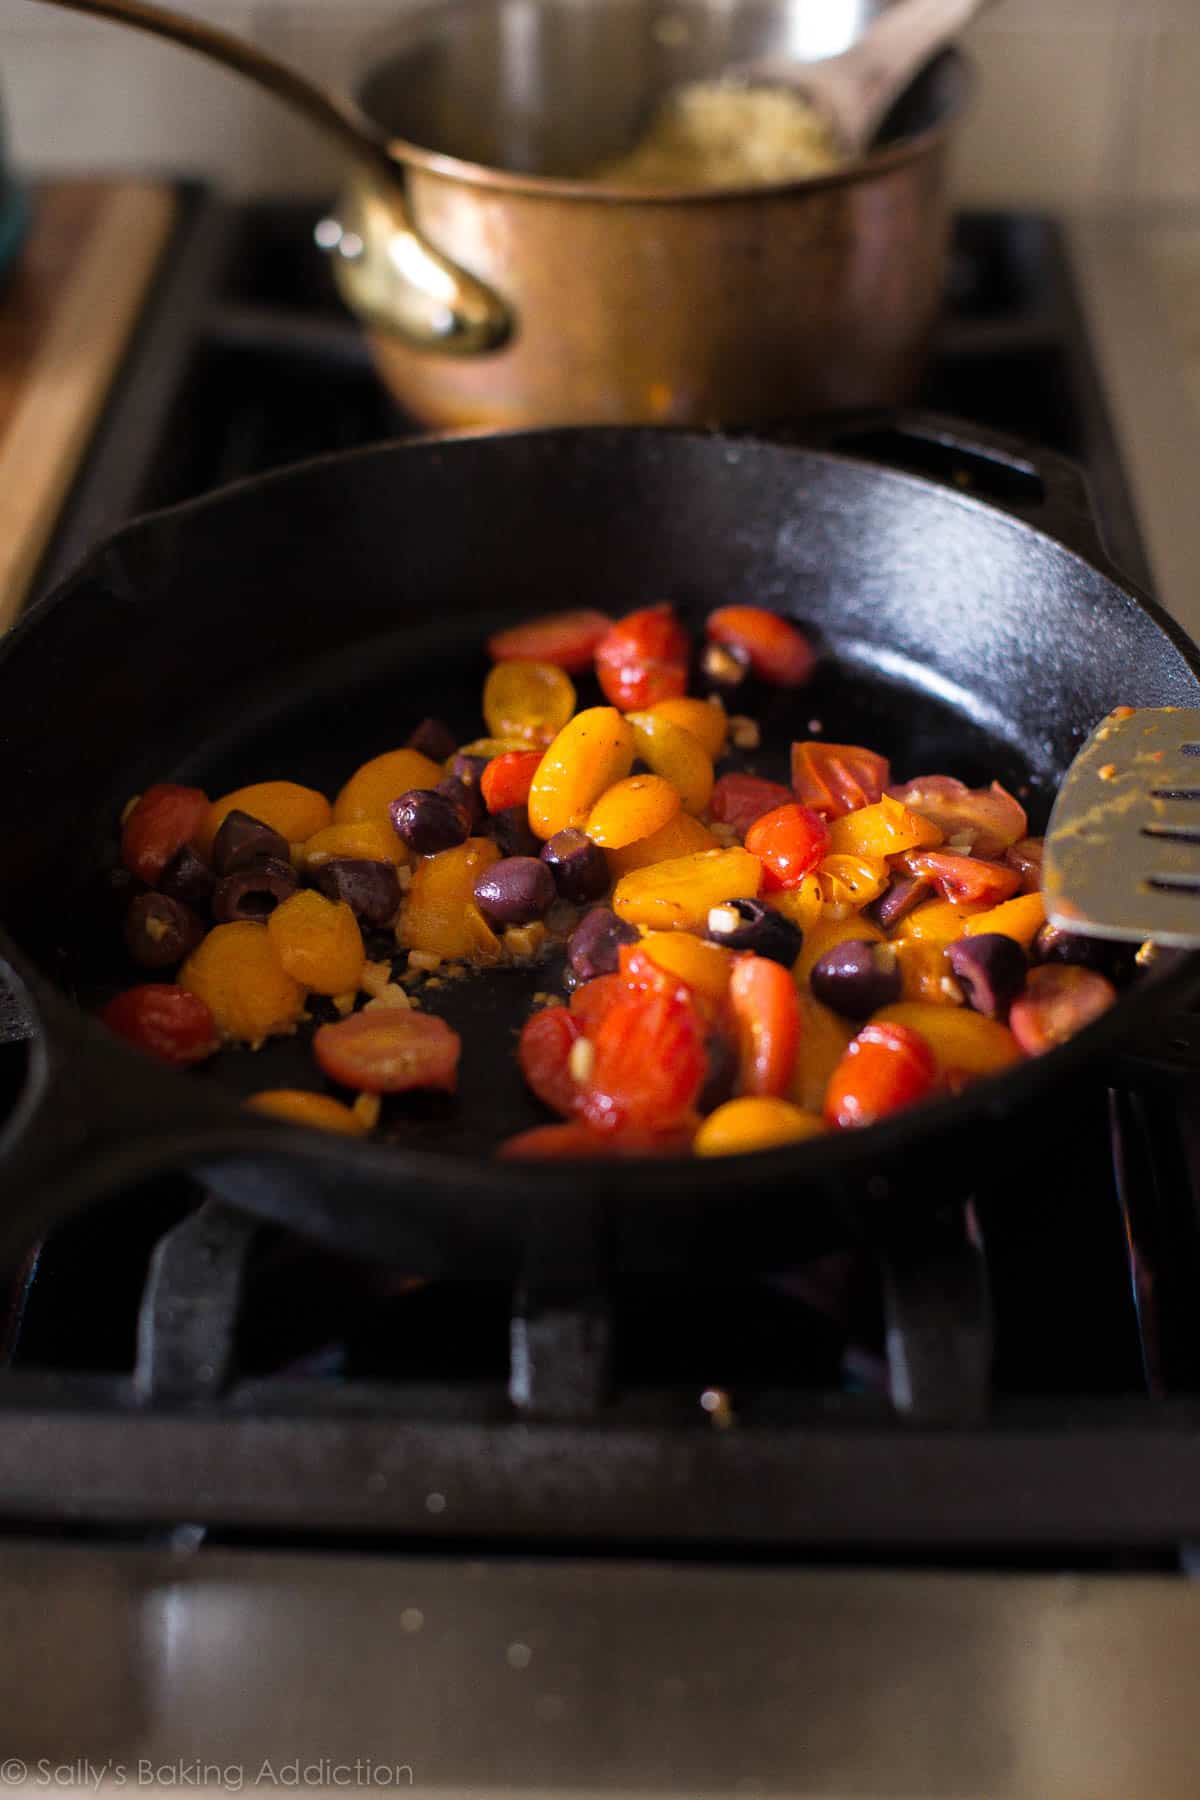 tomato, garlic, and olives in a skillet on the stove